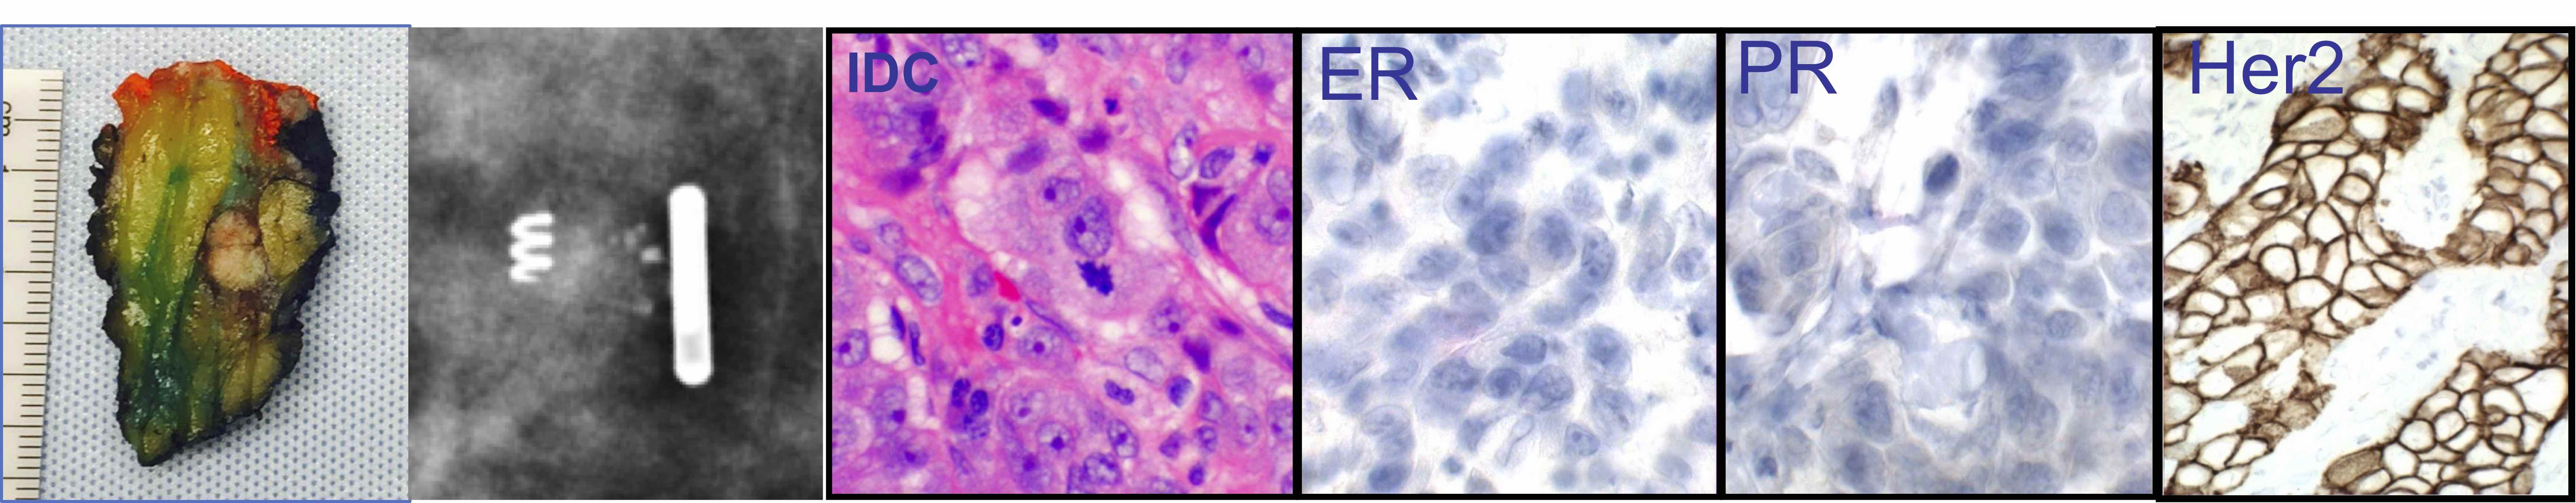 Breast Gross, Histology, and IHC